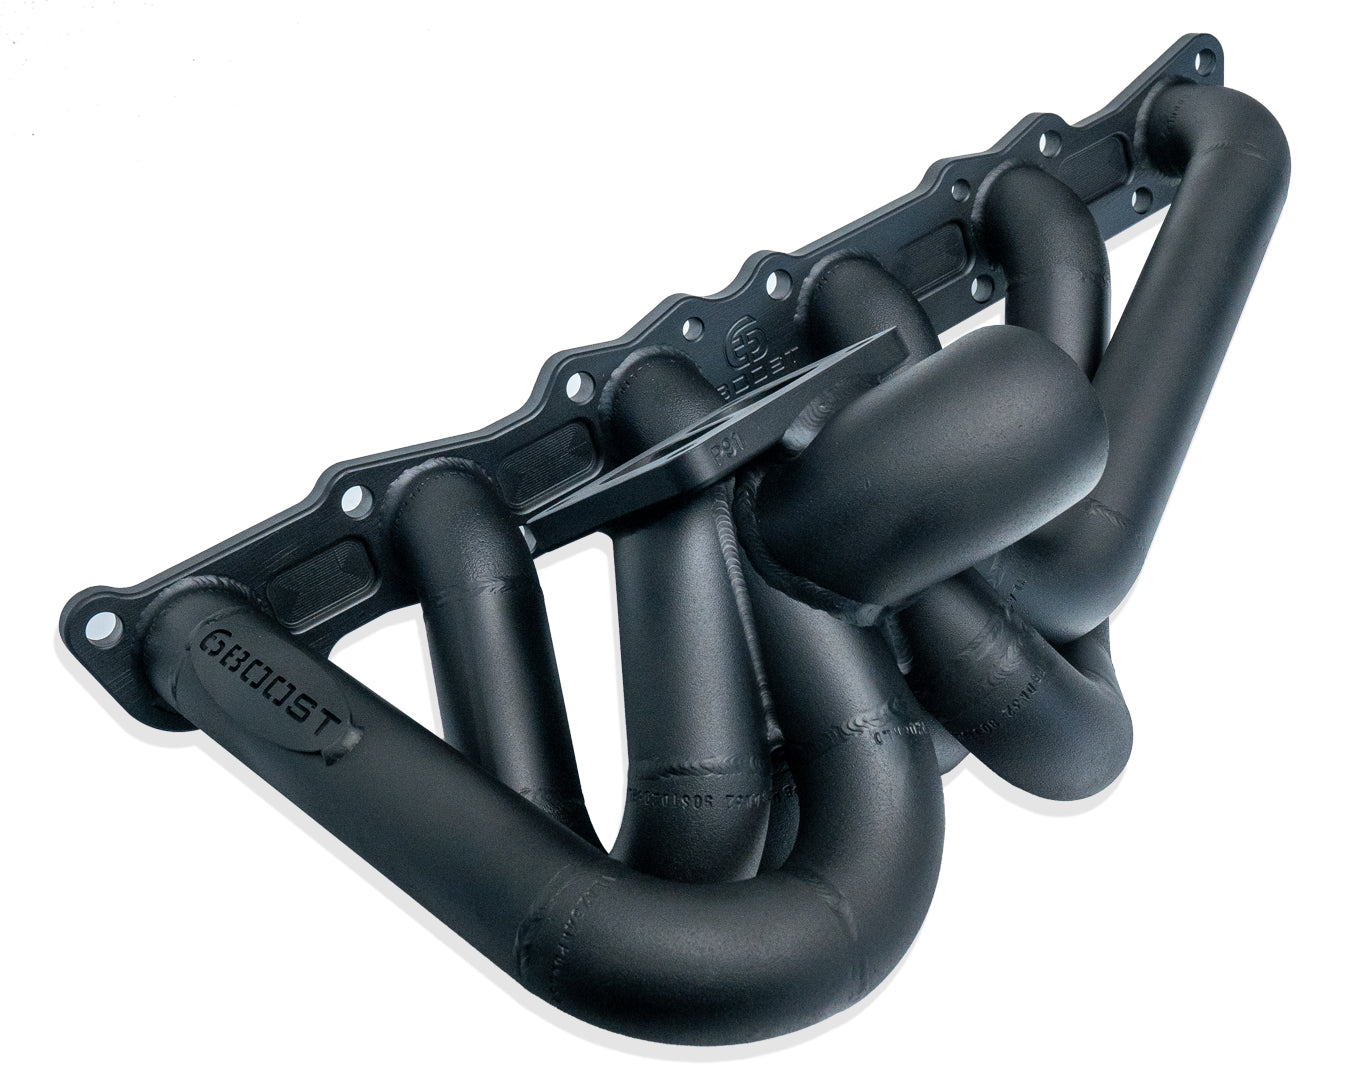 6boost - Nissan RB20/25DET T4 Exhaust Manifold